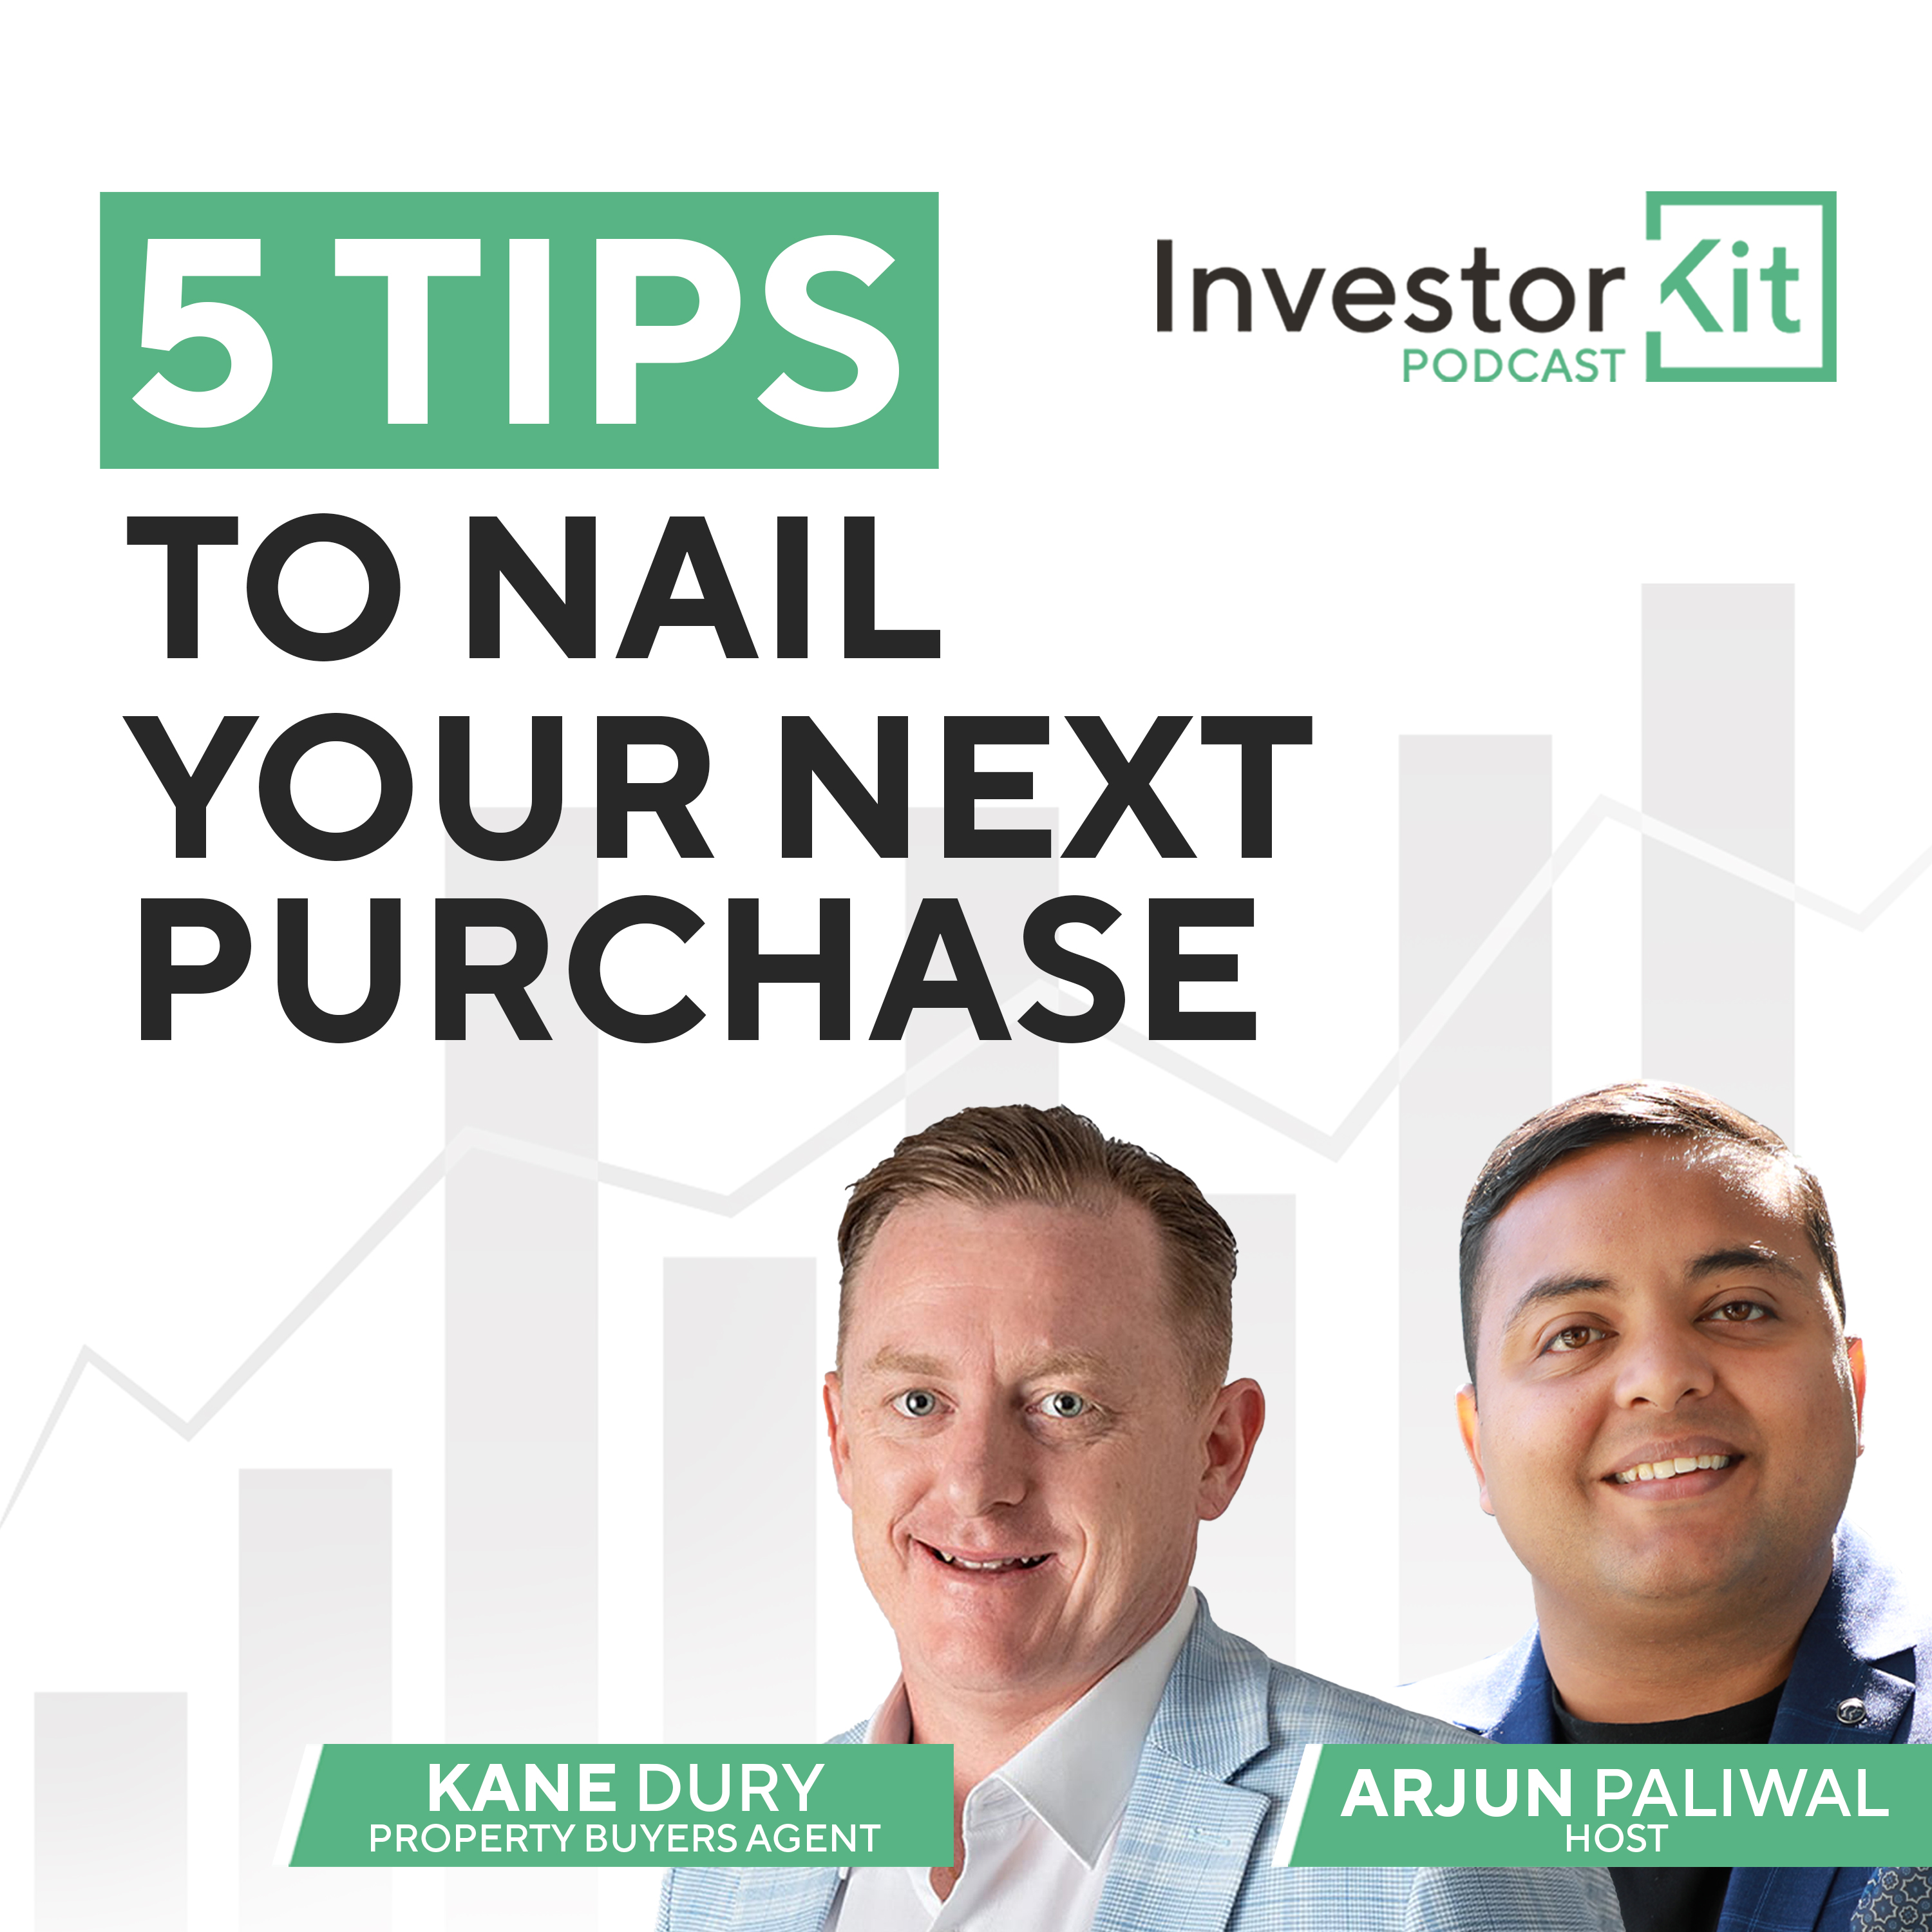 5 Tips Nail Your Next Purchase